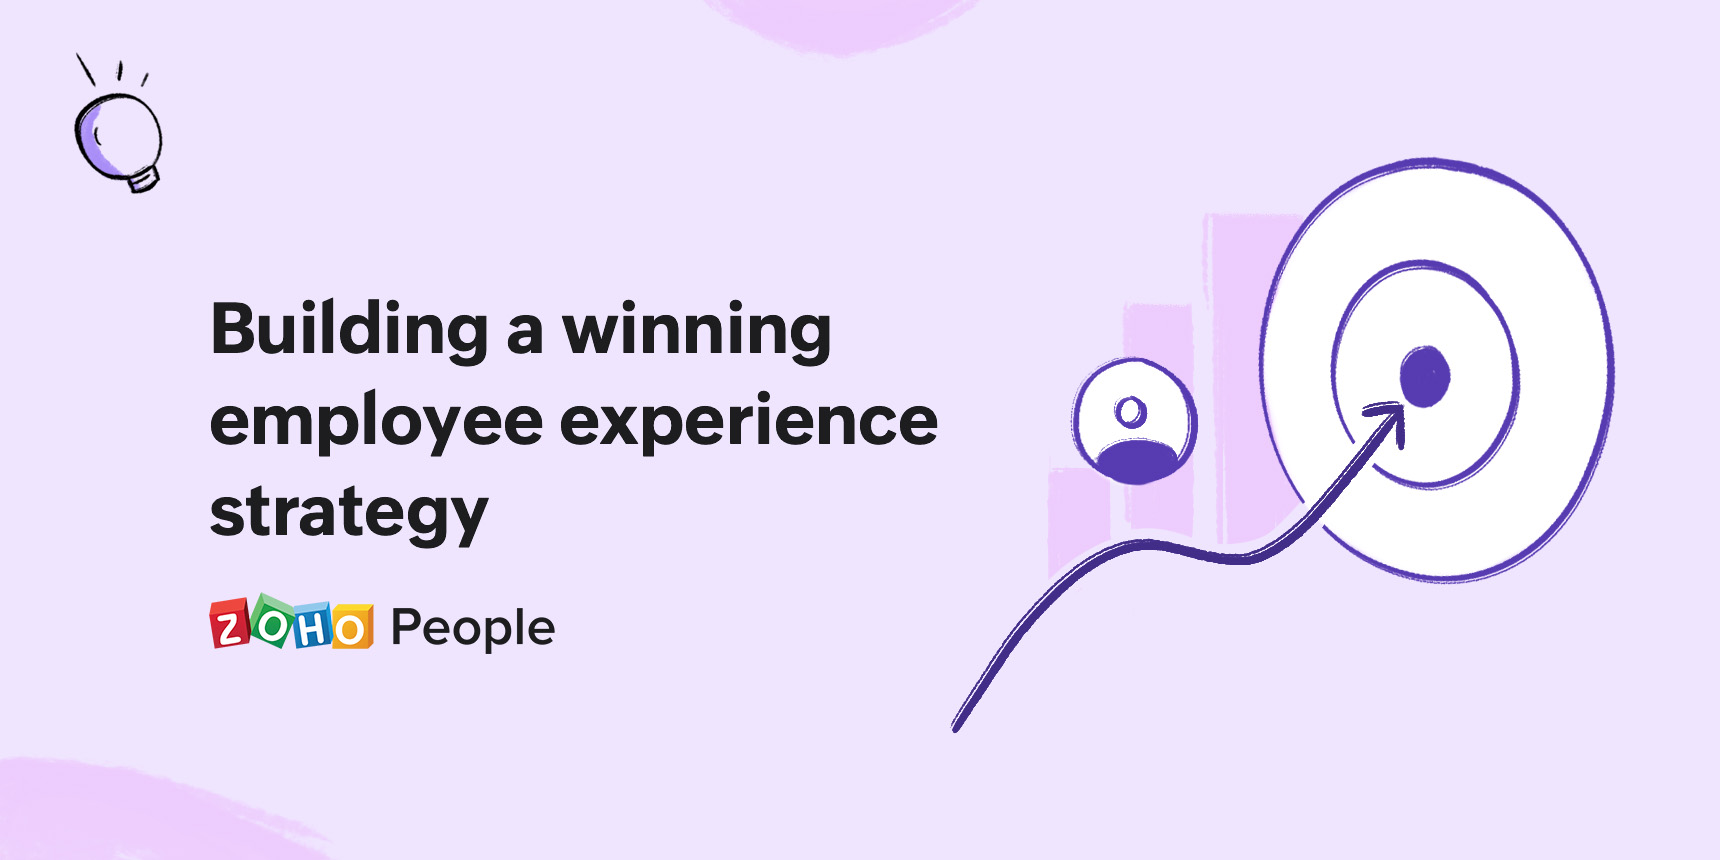 Building a winning employee experience strategy